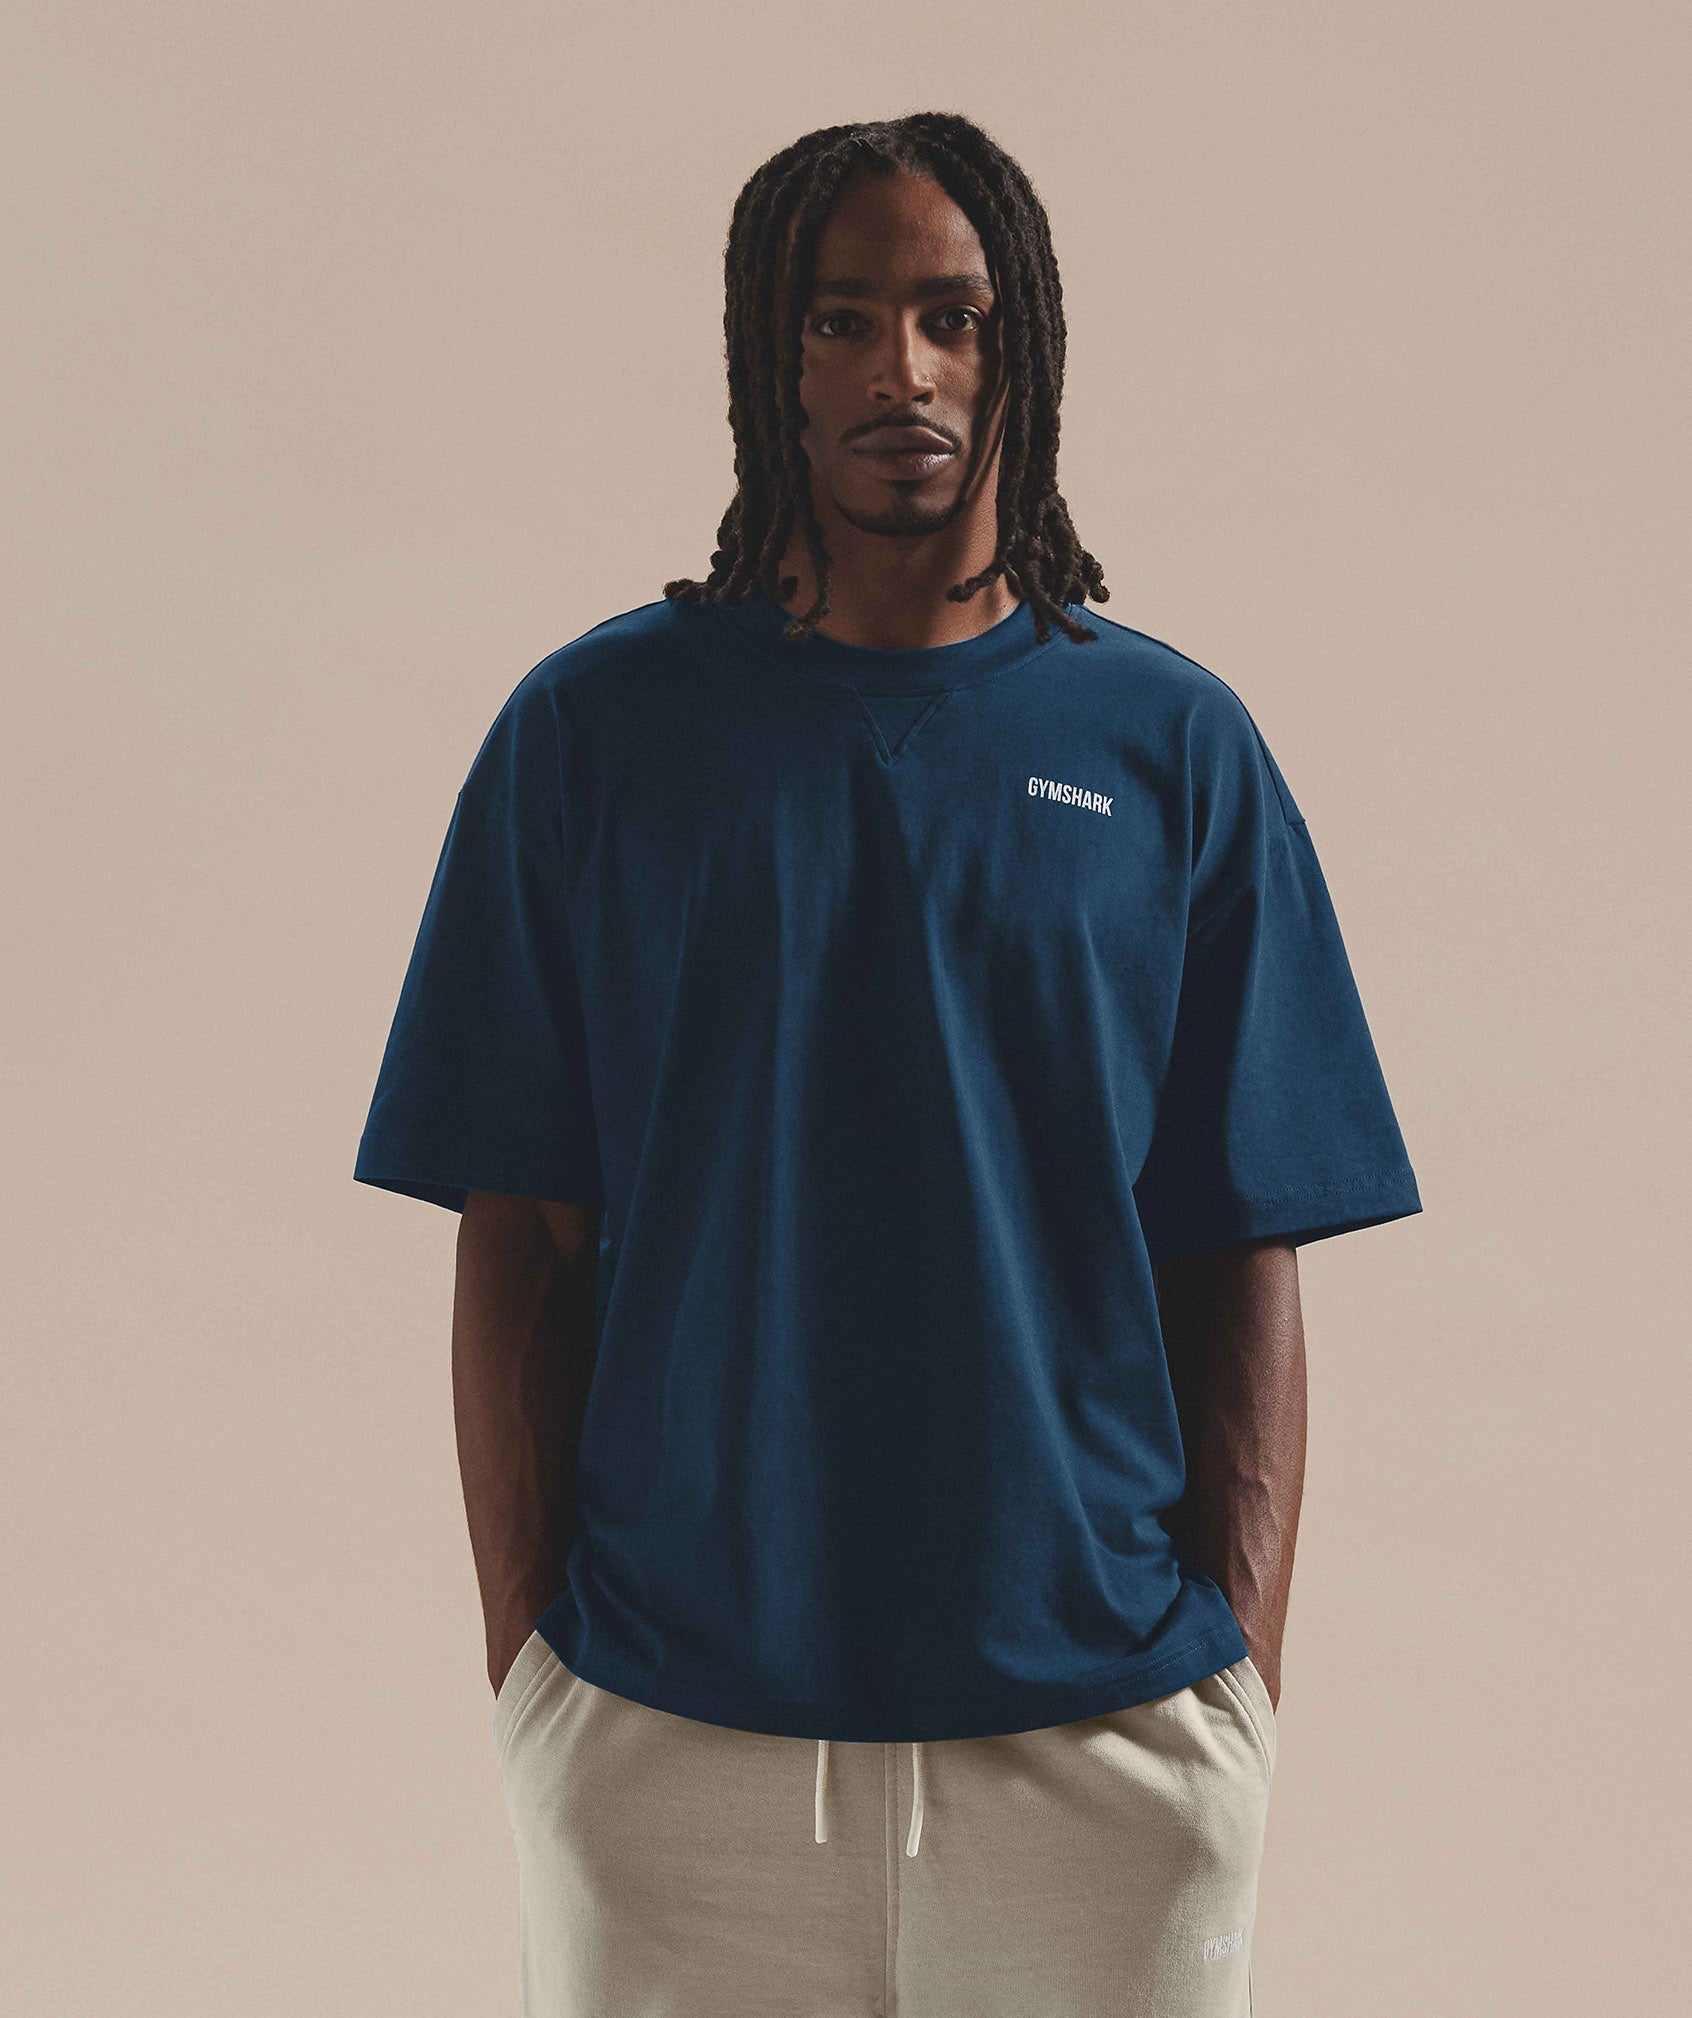 Rest Day Sweats T-Shirt in Navy - view 1